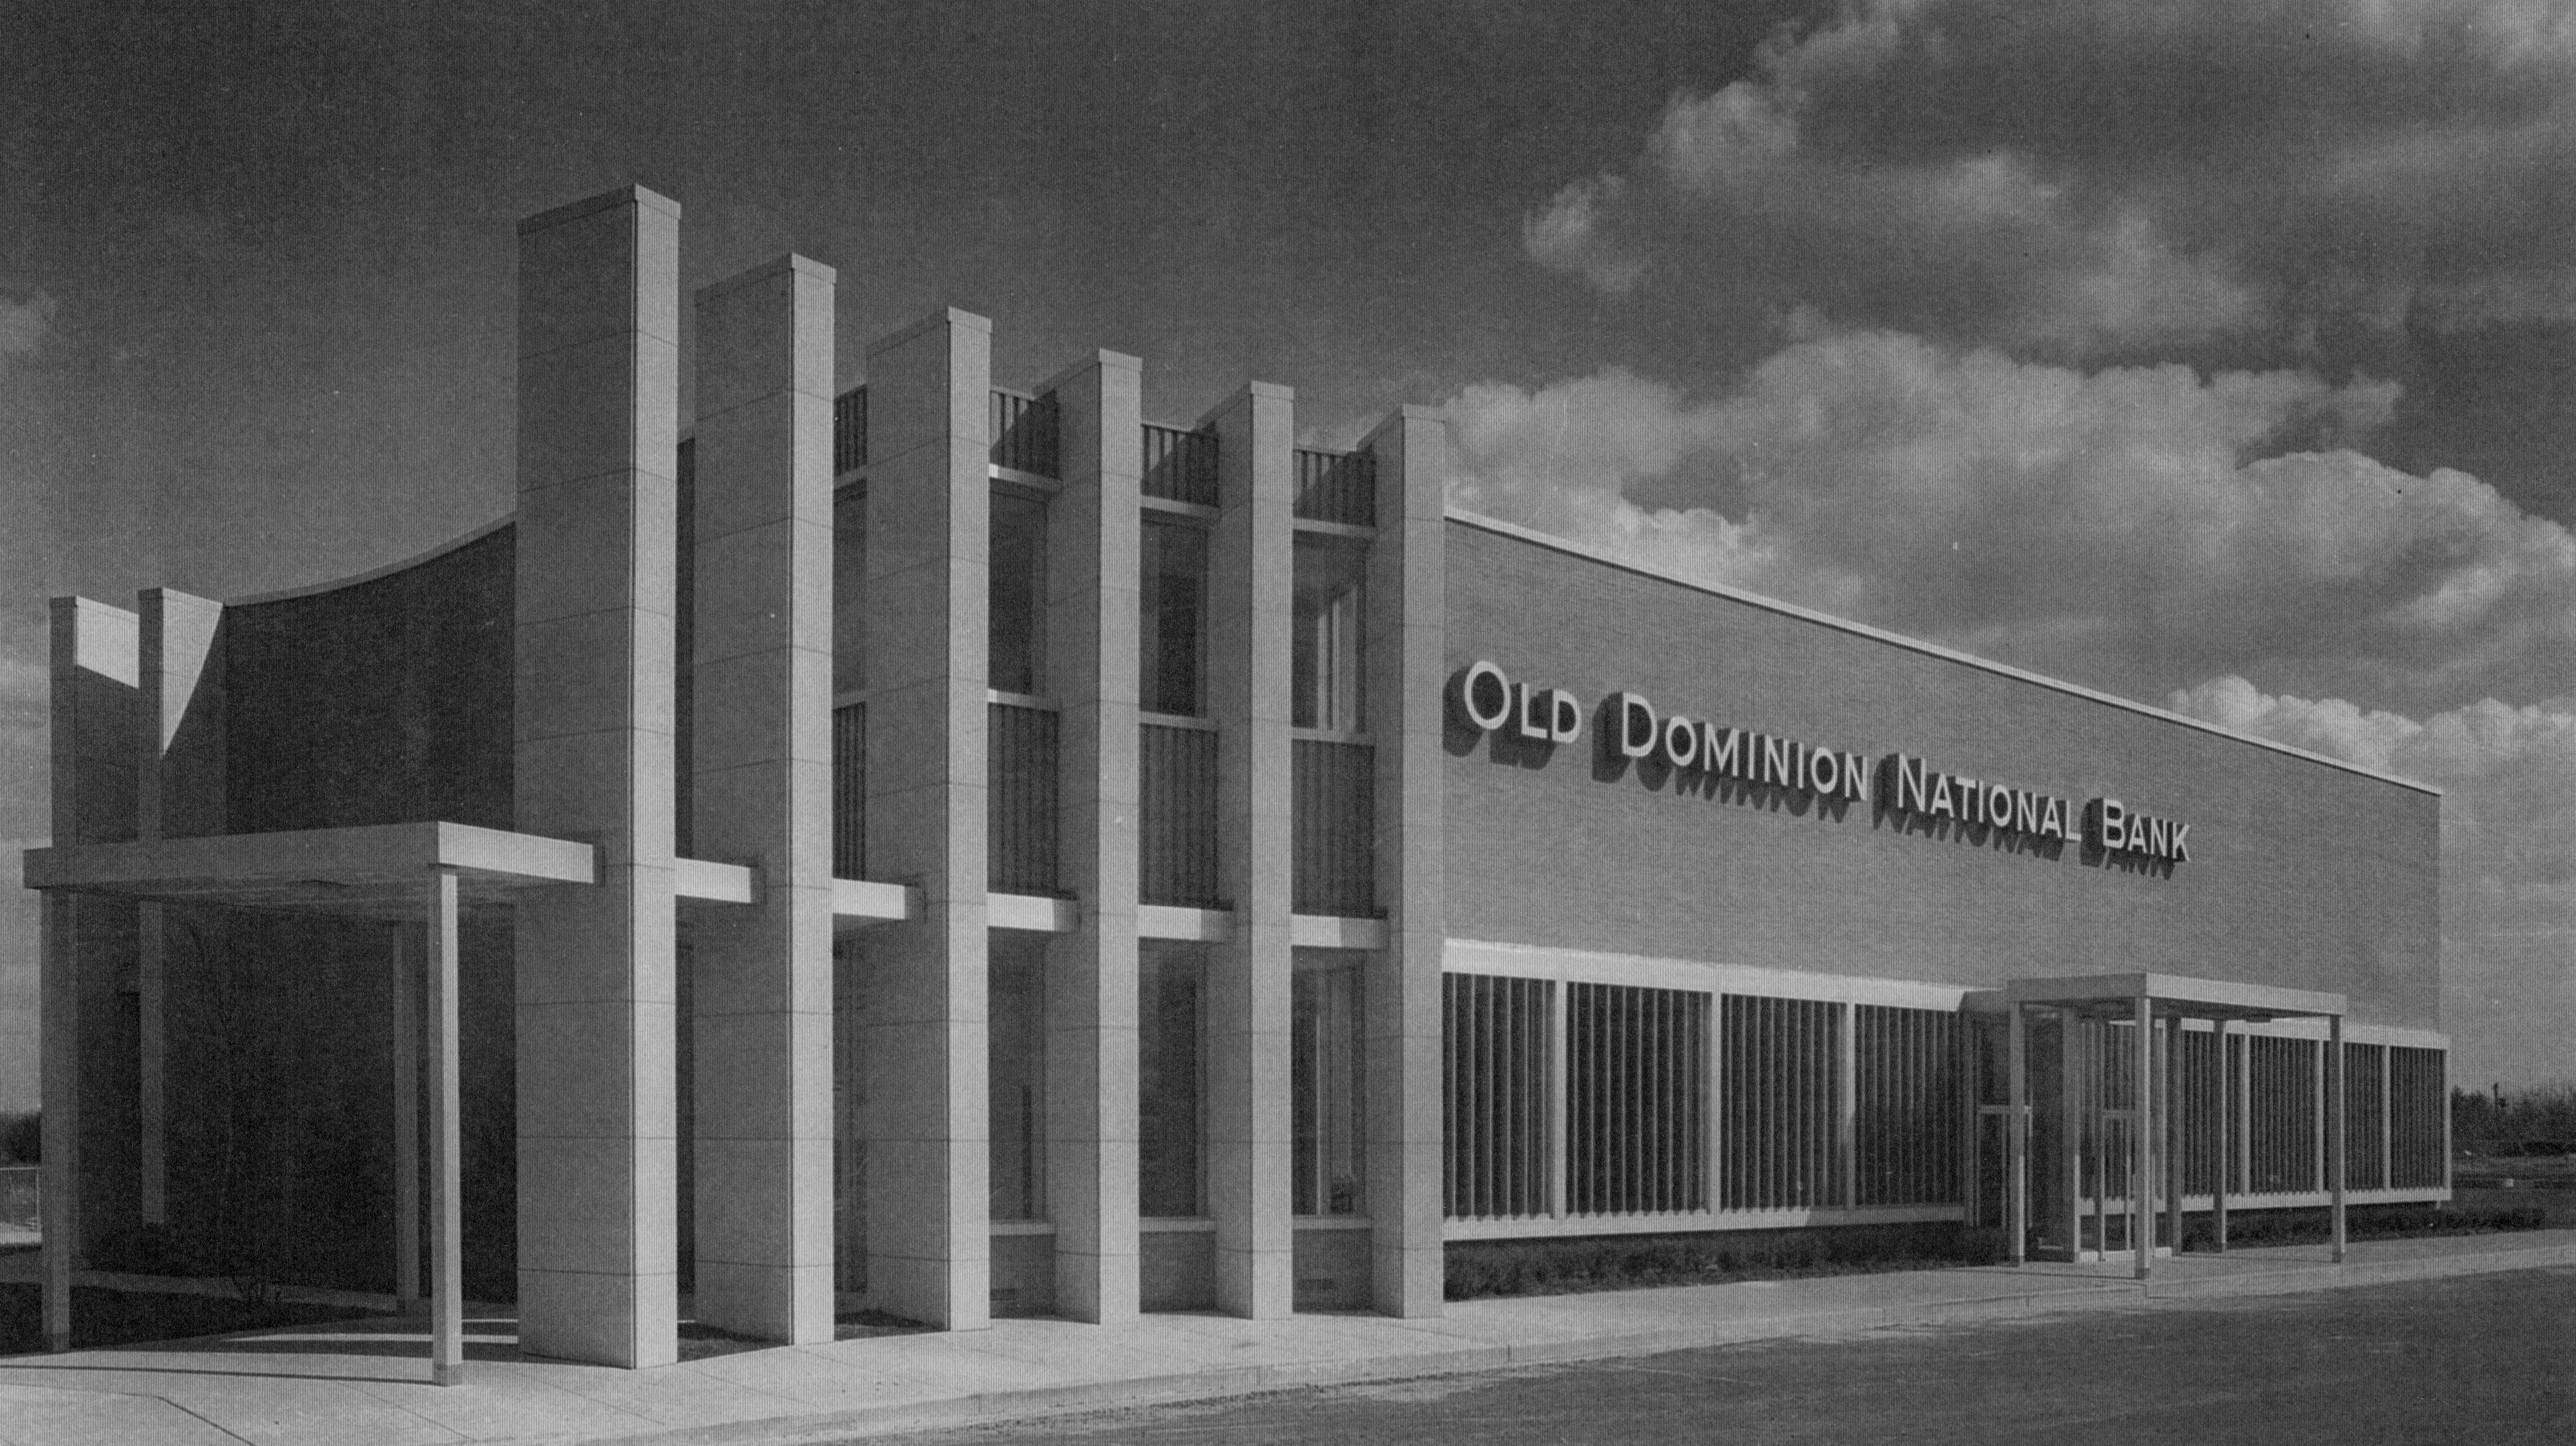 Old Dominion Bank on the corner of Backlick Rd. and Little River Tpk.